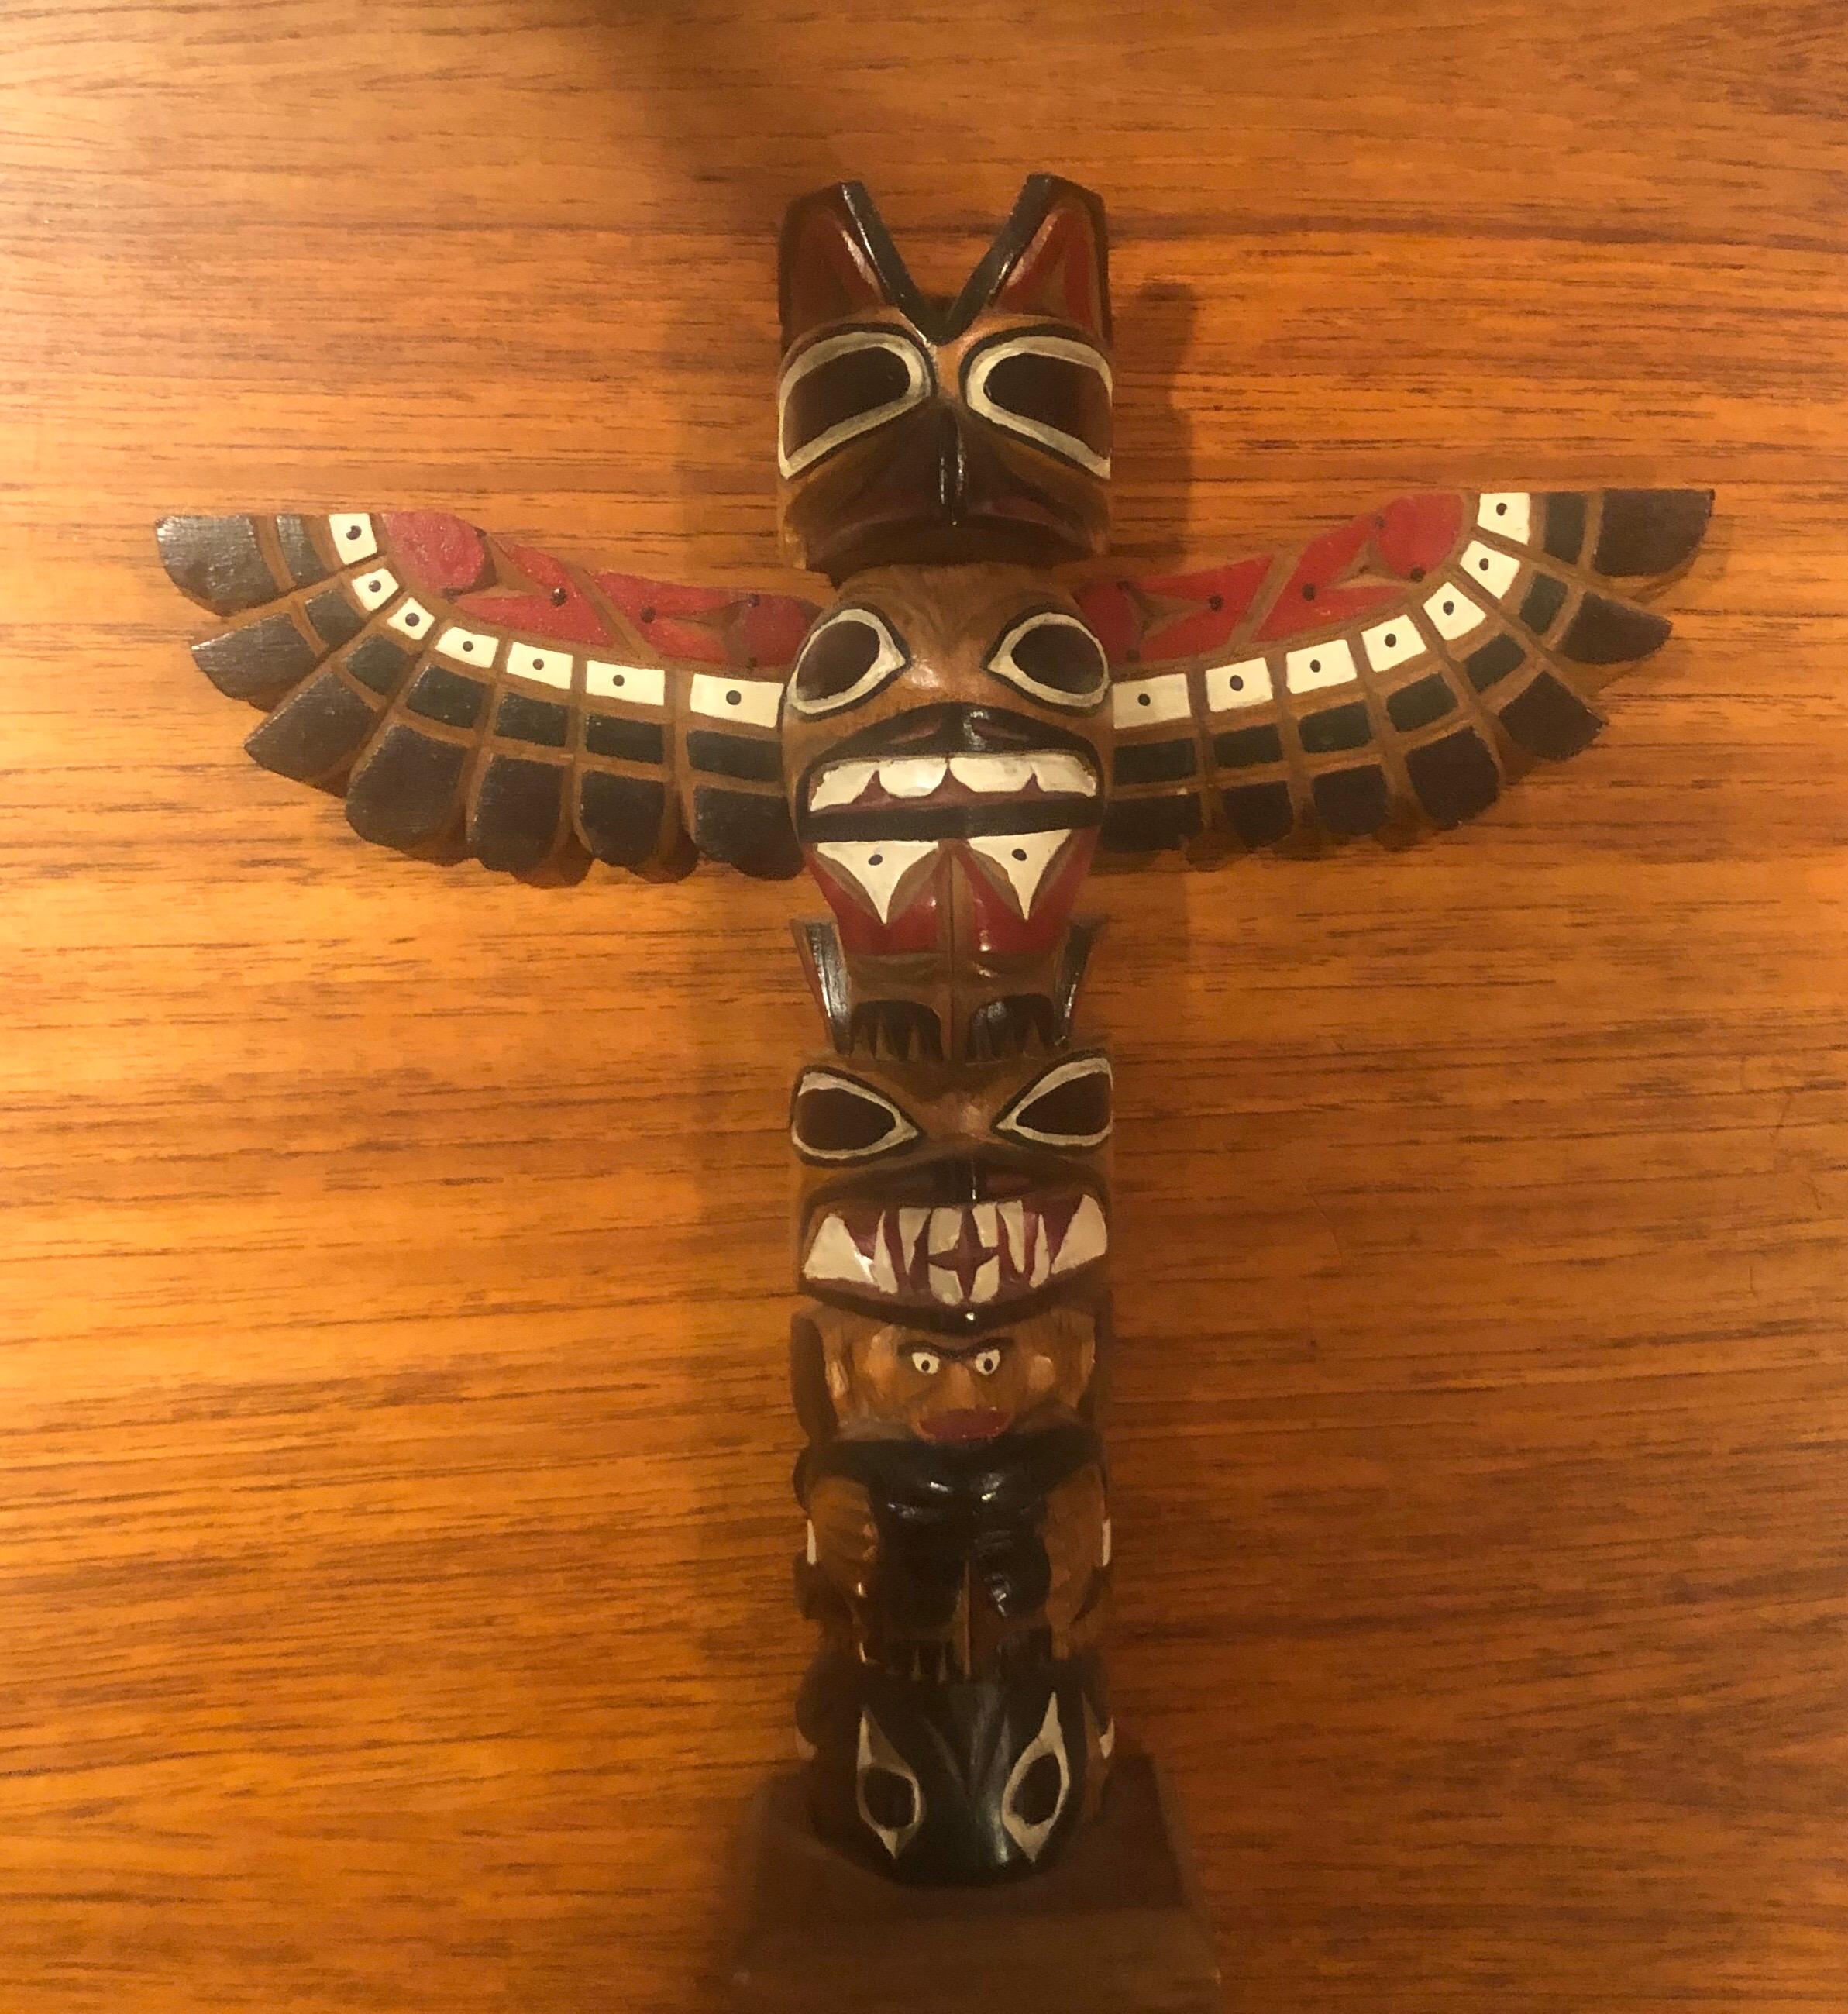 A fine example attributed to master Nuu-chah-nulth carver Ray Williams, circa 1960s. Ray Williams was the son of famed carver Sam Williams who started carving for the Ye Olde Curiosity shop in Seattle, WA in the early 1900s. This example features